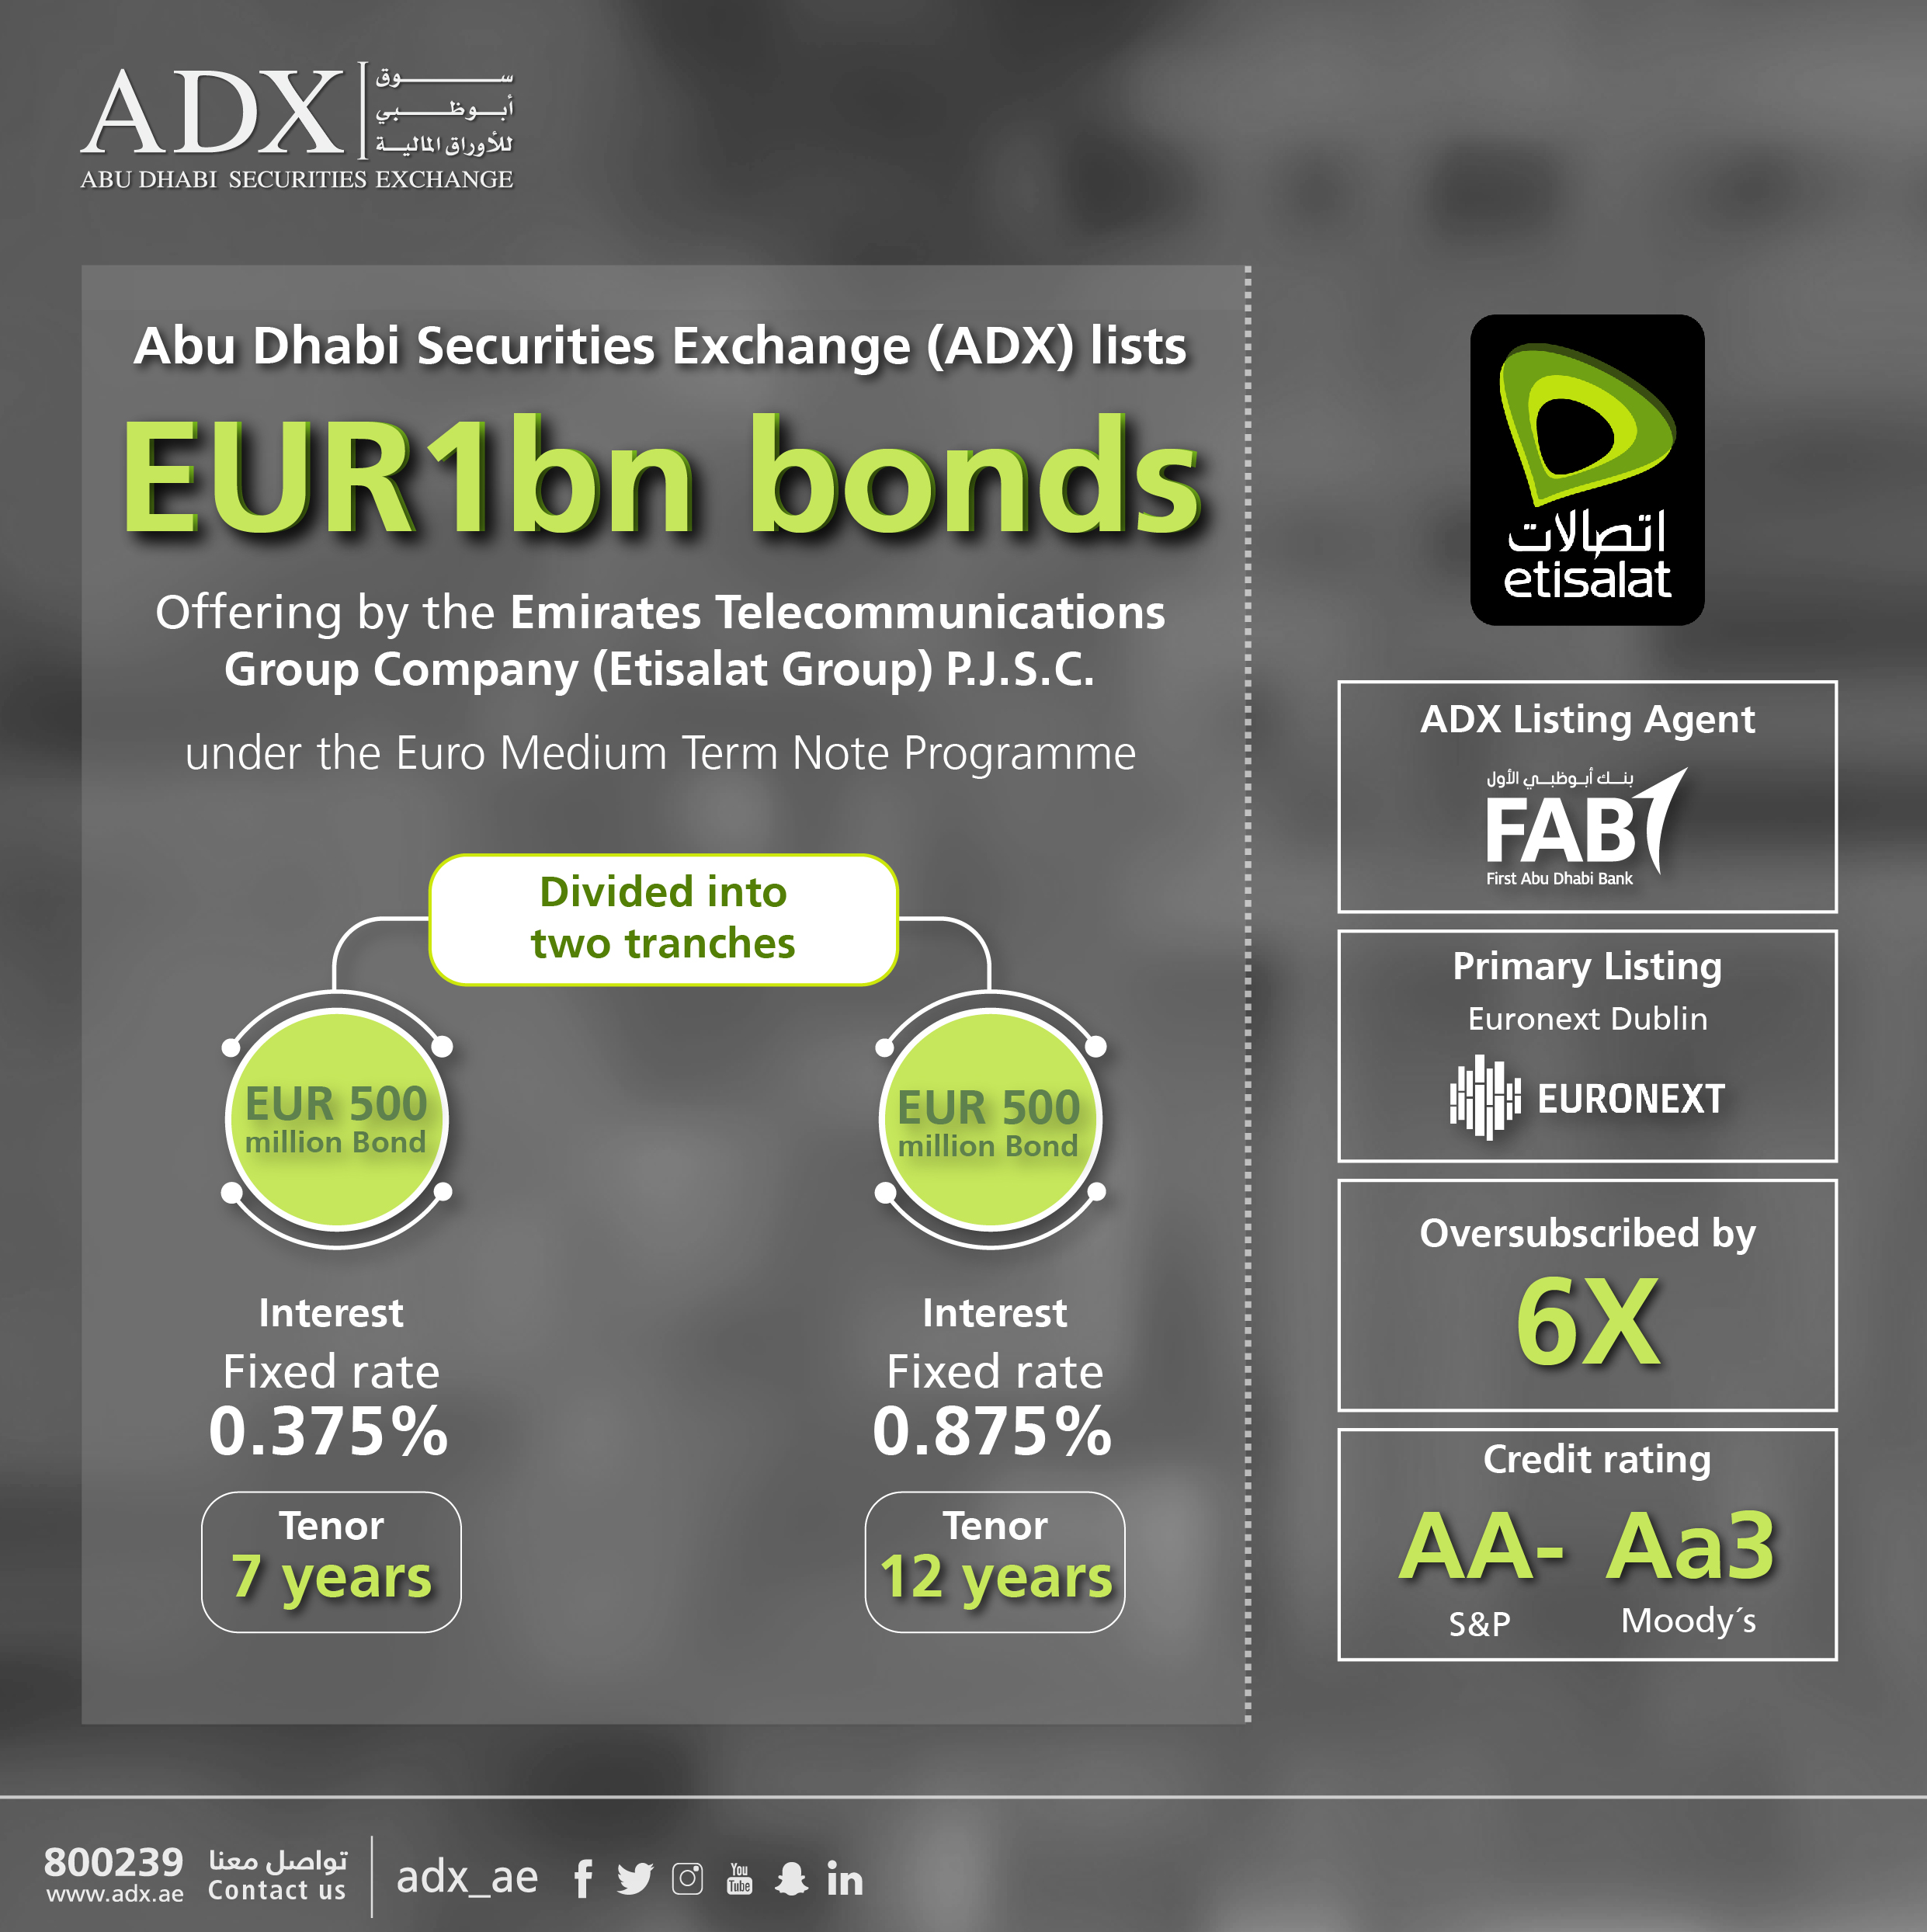 Abu Dhabi Securities Exchange (ADX) Lists 1 Billion Euros Of Bonds Issued By Etisalat Group